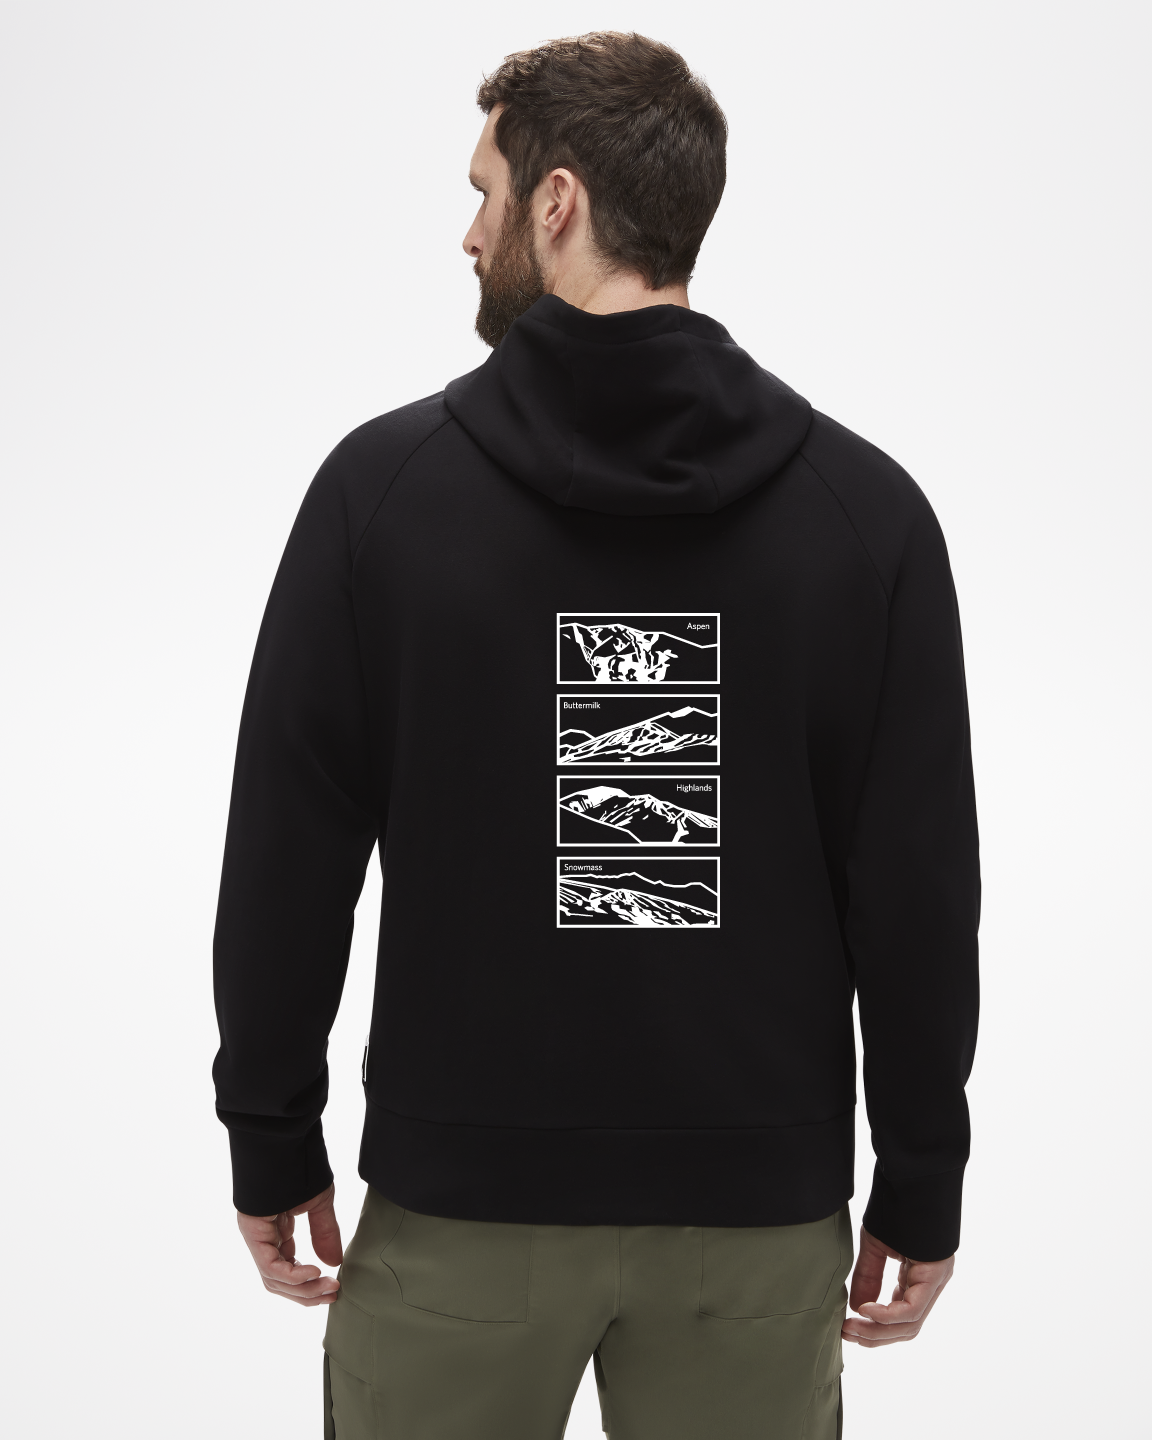 Four Mountains Snapshot Unisex Hoodie Back Shown in Black